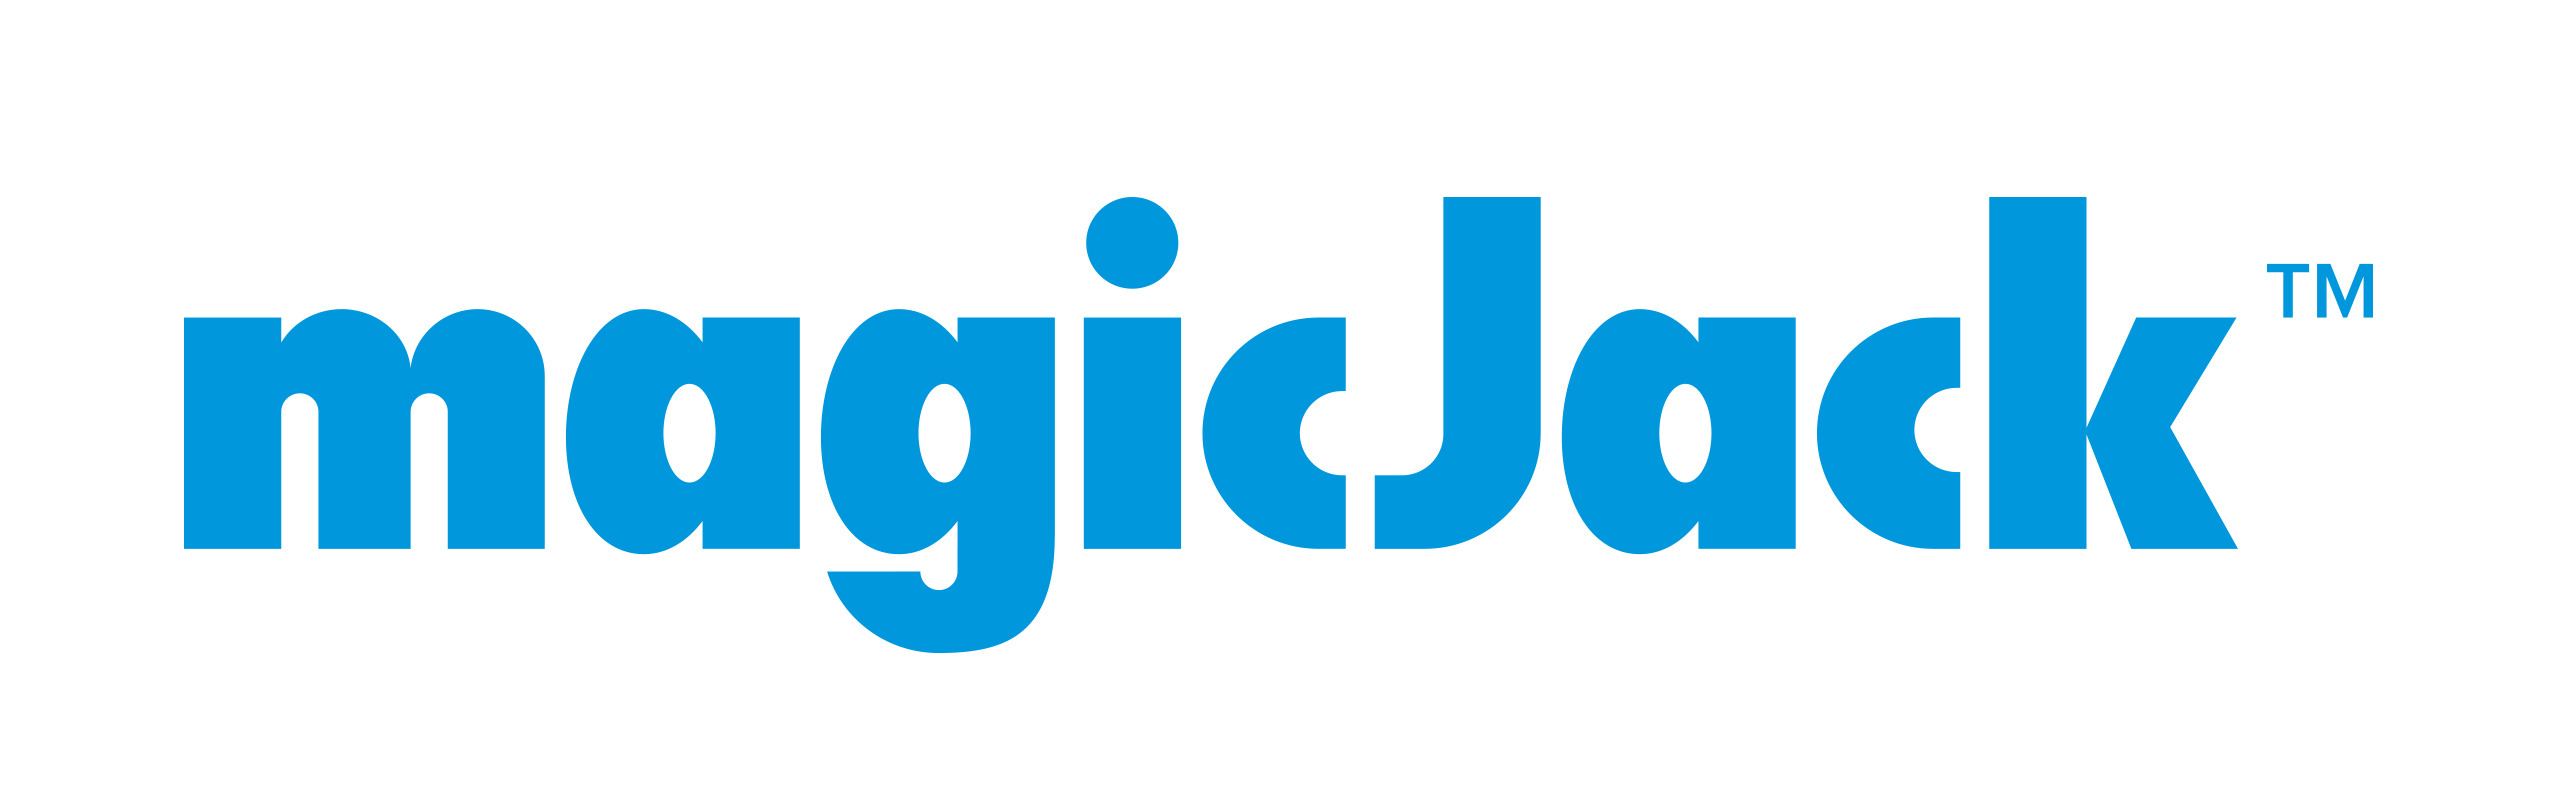 magicJack to Review 